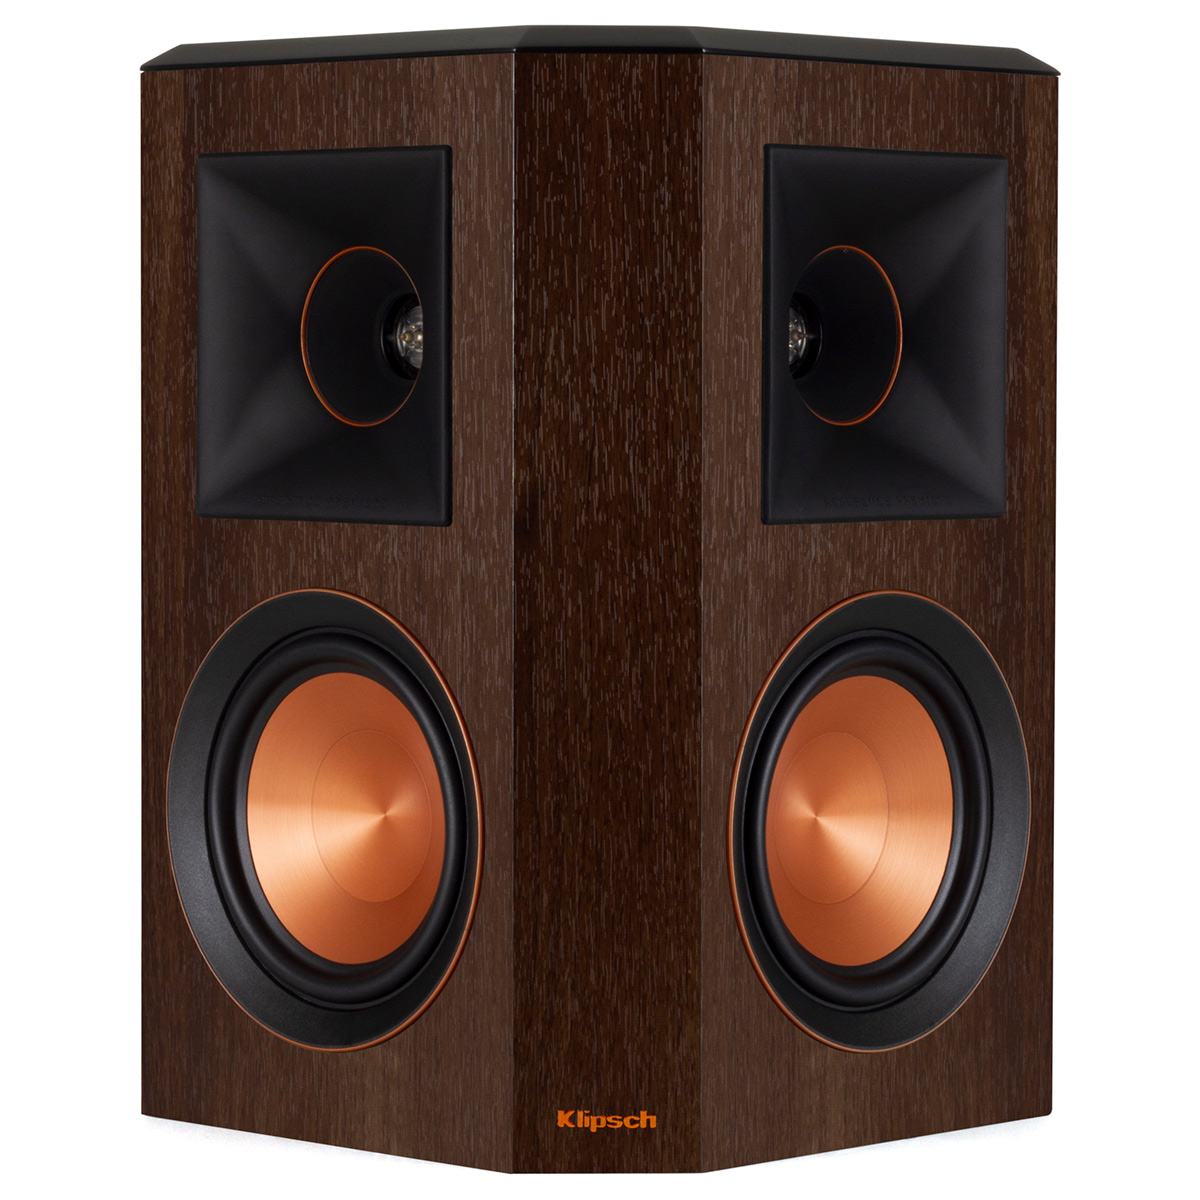 Klipsch RP-502S Reference Premiere Surround Speakers - Pair (Walnut) - image 2 of 3